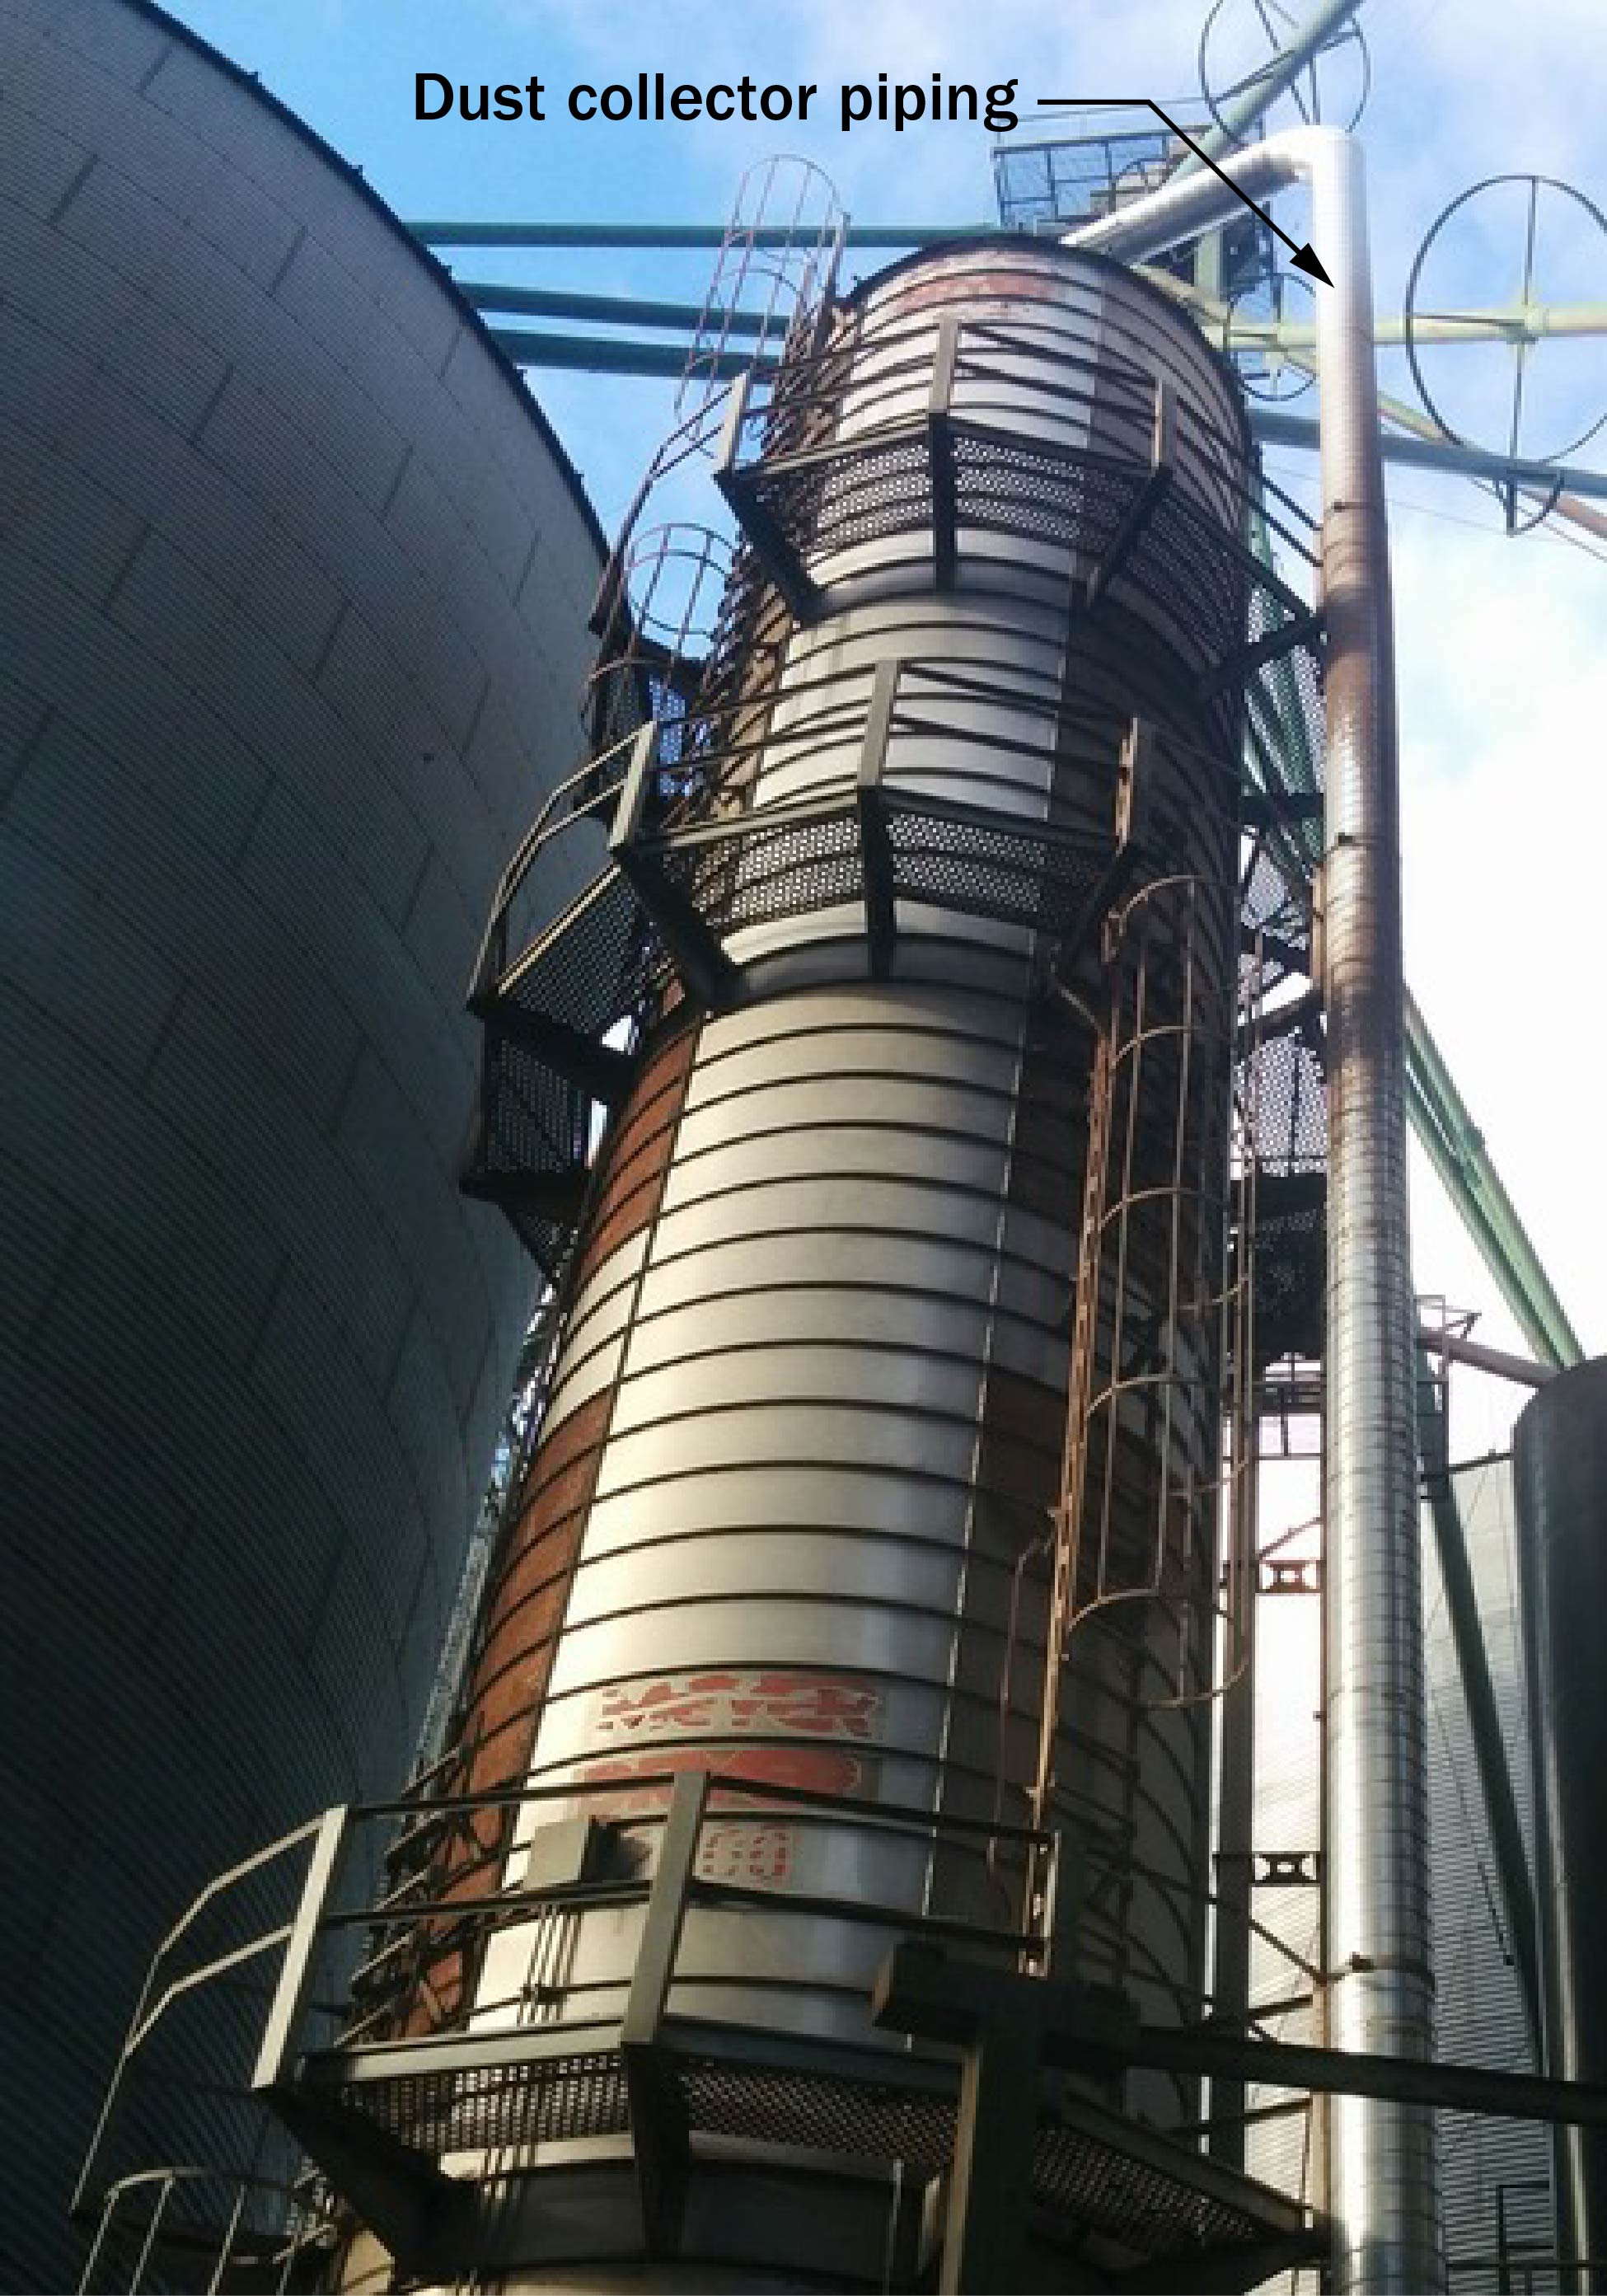 A tower dryer with dust control piping attached. Piping is connected to a cyclone filter to remove fines and red-dog from grain as it enters the top of the dryer.